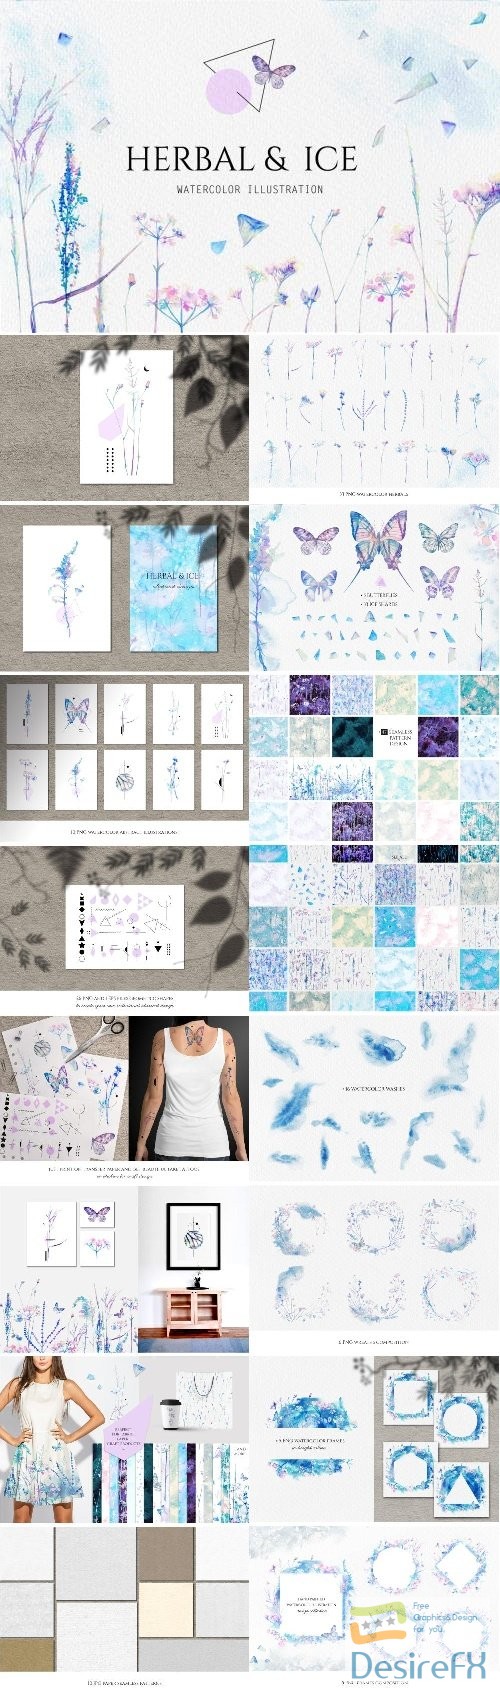 Watercolor floral design collection, herbal and ice - 153959